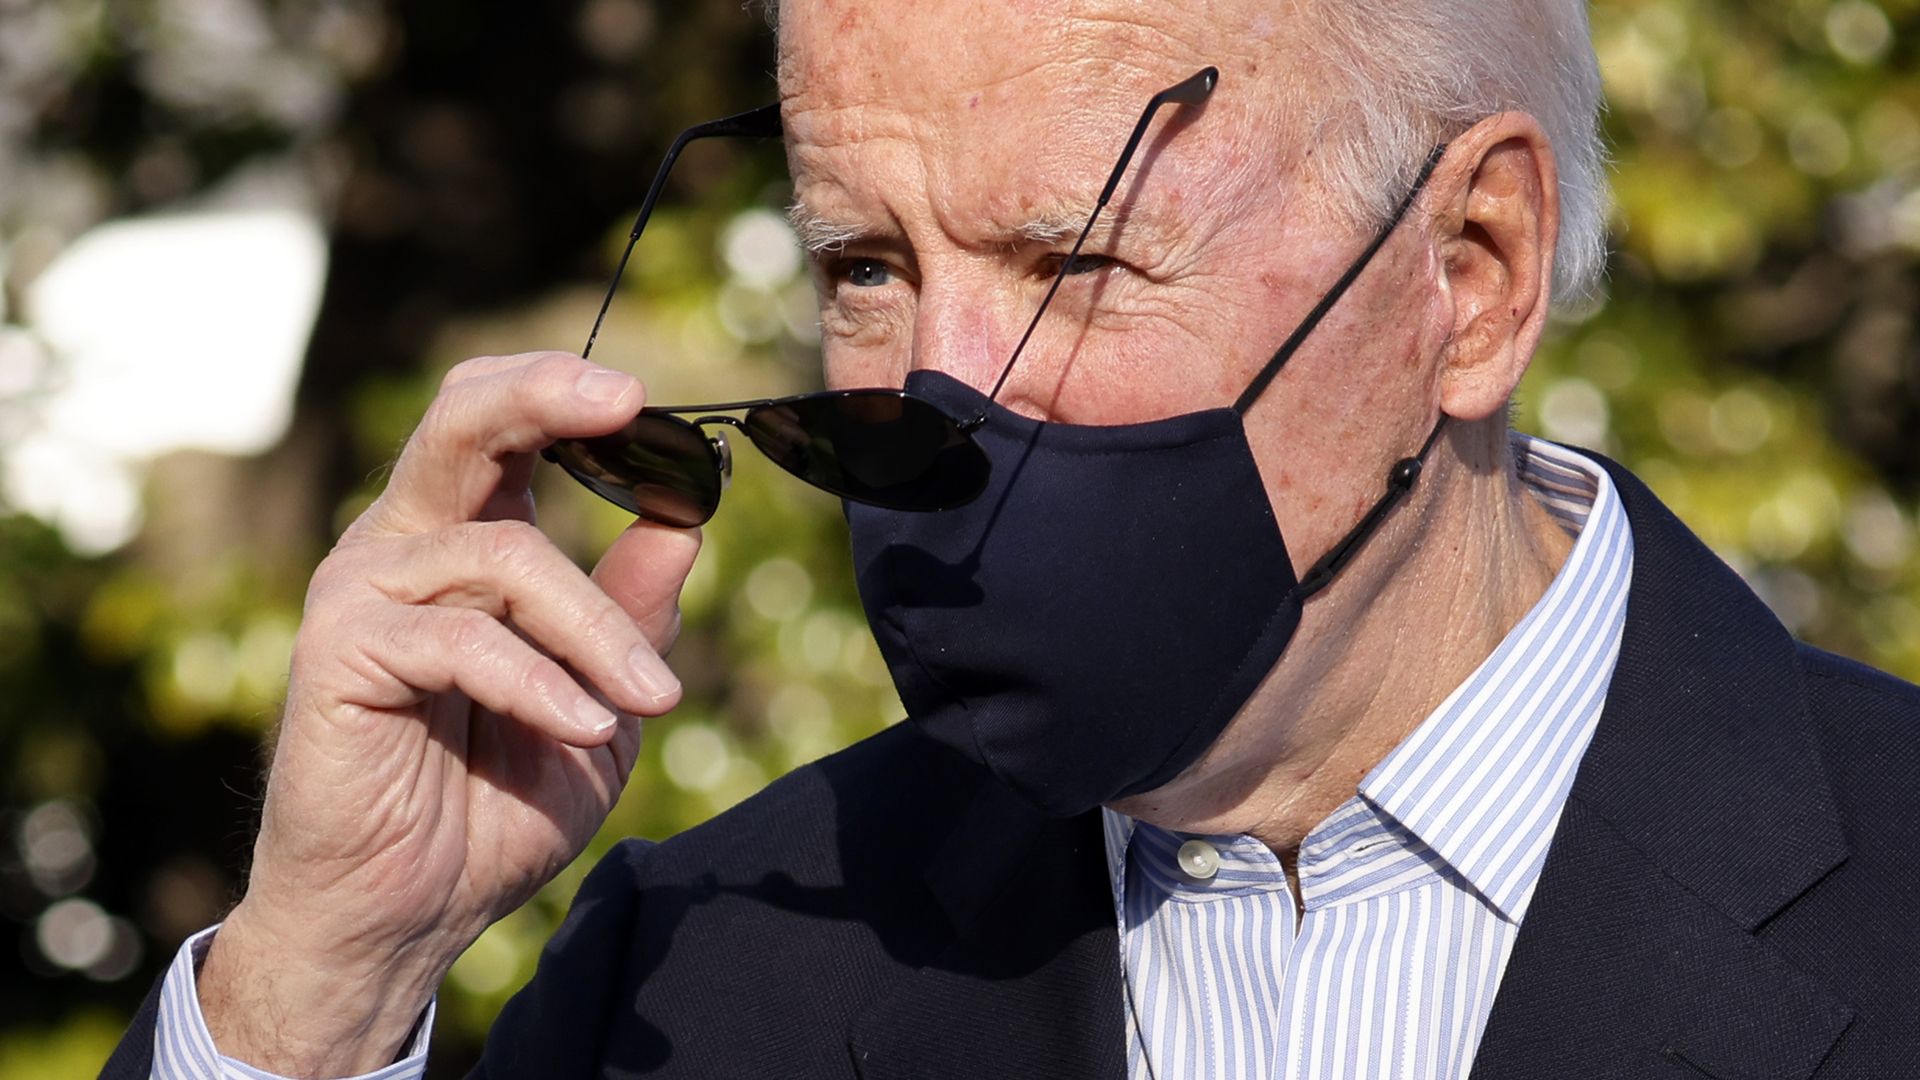 President Biden is seen removing his sunglasses as he returns from Camp David.